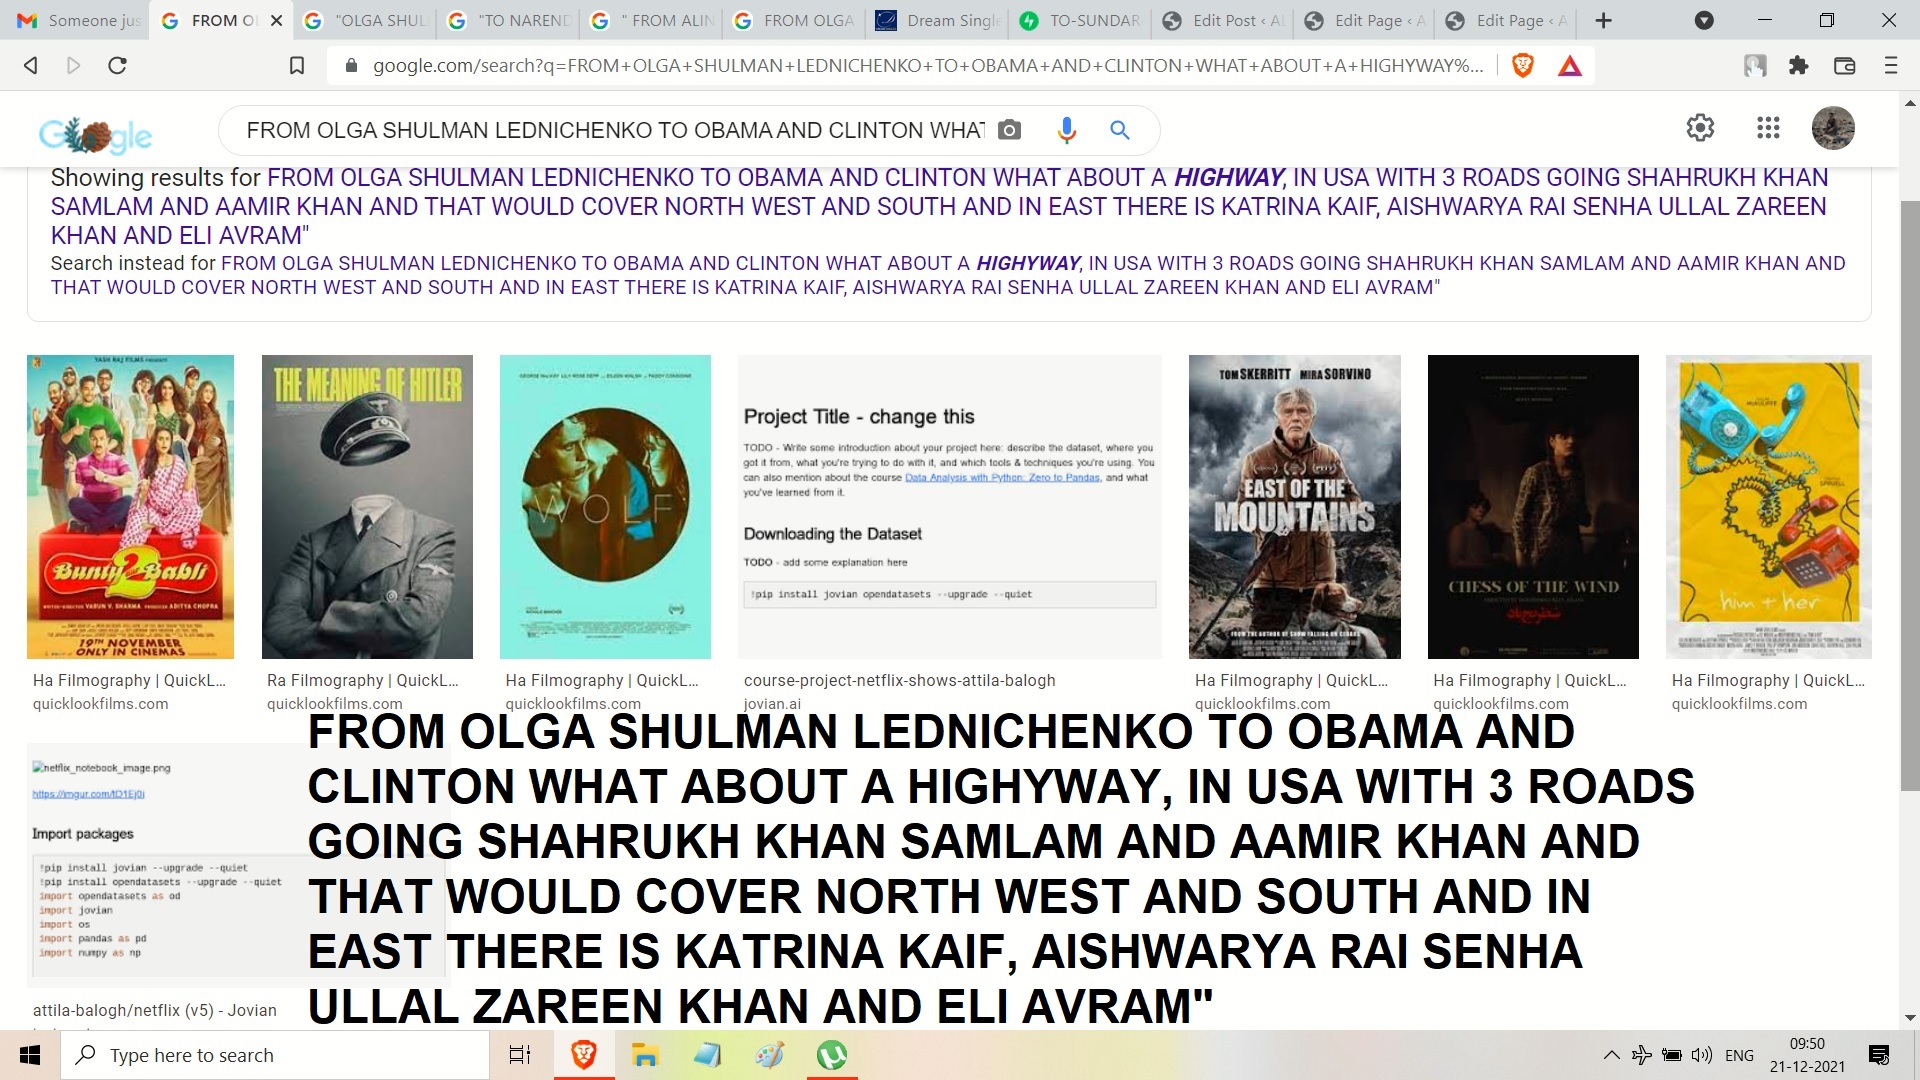 FROM OLGA SHULMAN LEDNICHENKO TO OBAMA AND CLINTON WHAT ABOUT A HIGHYWAY, IN USA WITH 3 ROADS GOING SHAHRUKH KHAN SAMLAM AND AAMIR KHAN AND THAT WOULD